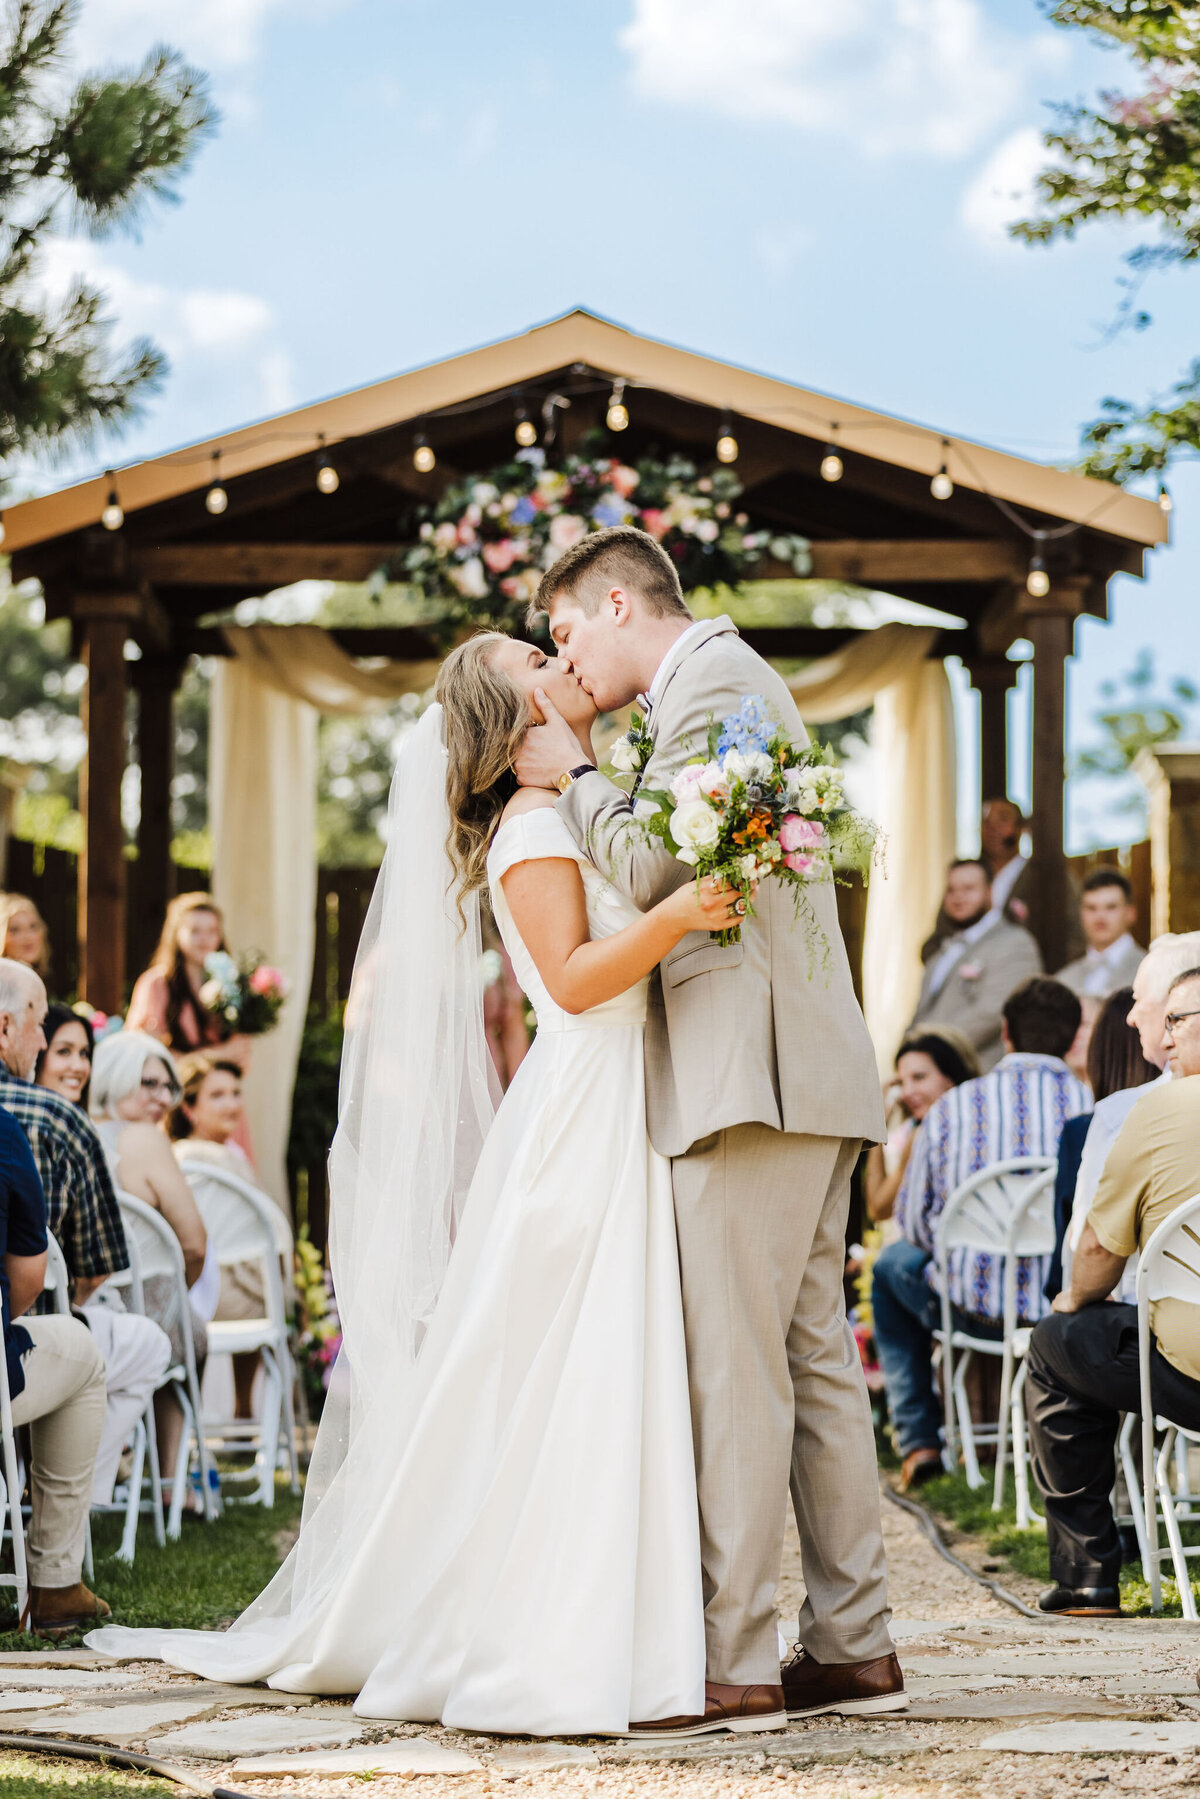 Bride and groom kissing at end of isle at Longview, Texas wedding venue